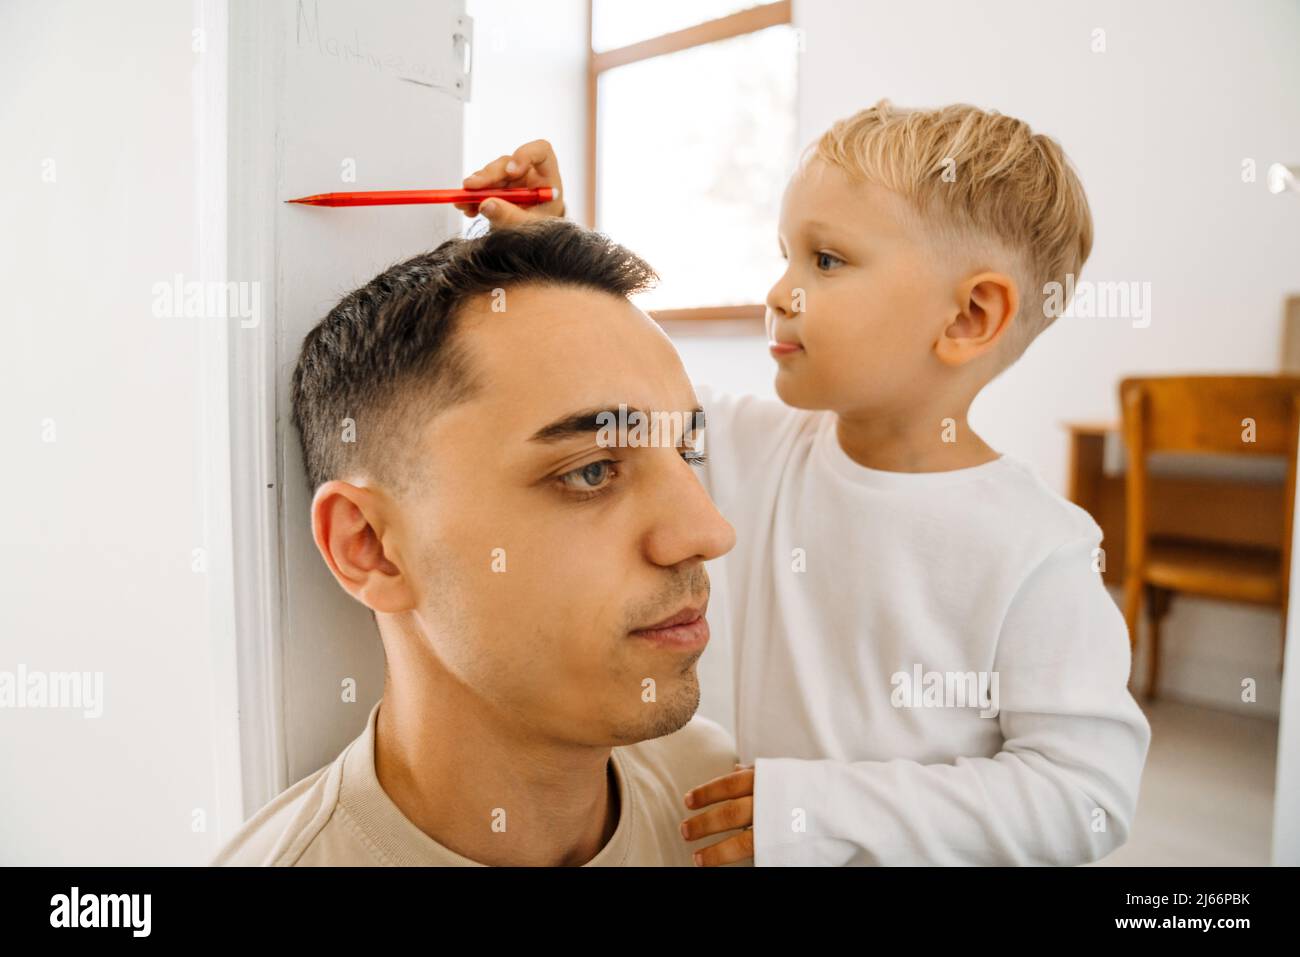 White boy drawing on doorjamb while measuring his father's height at home Stock Photo